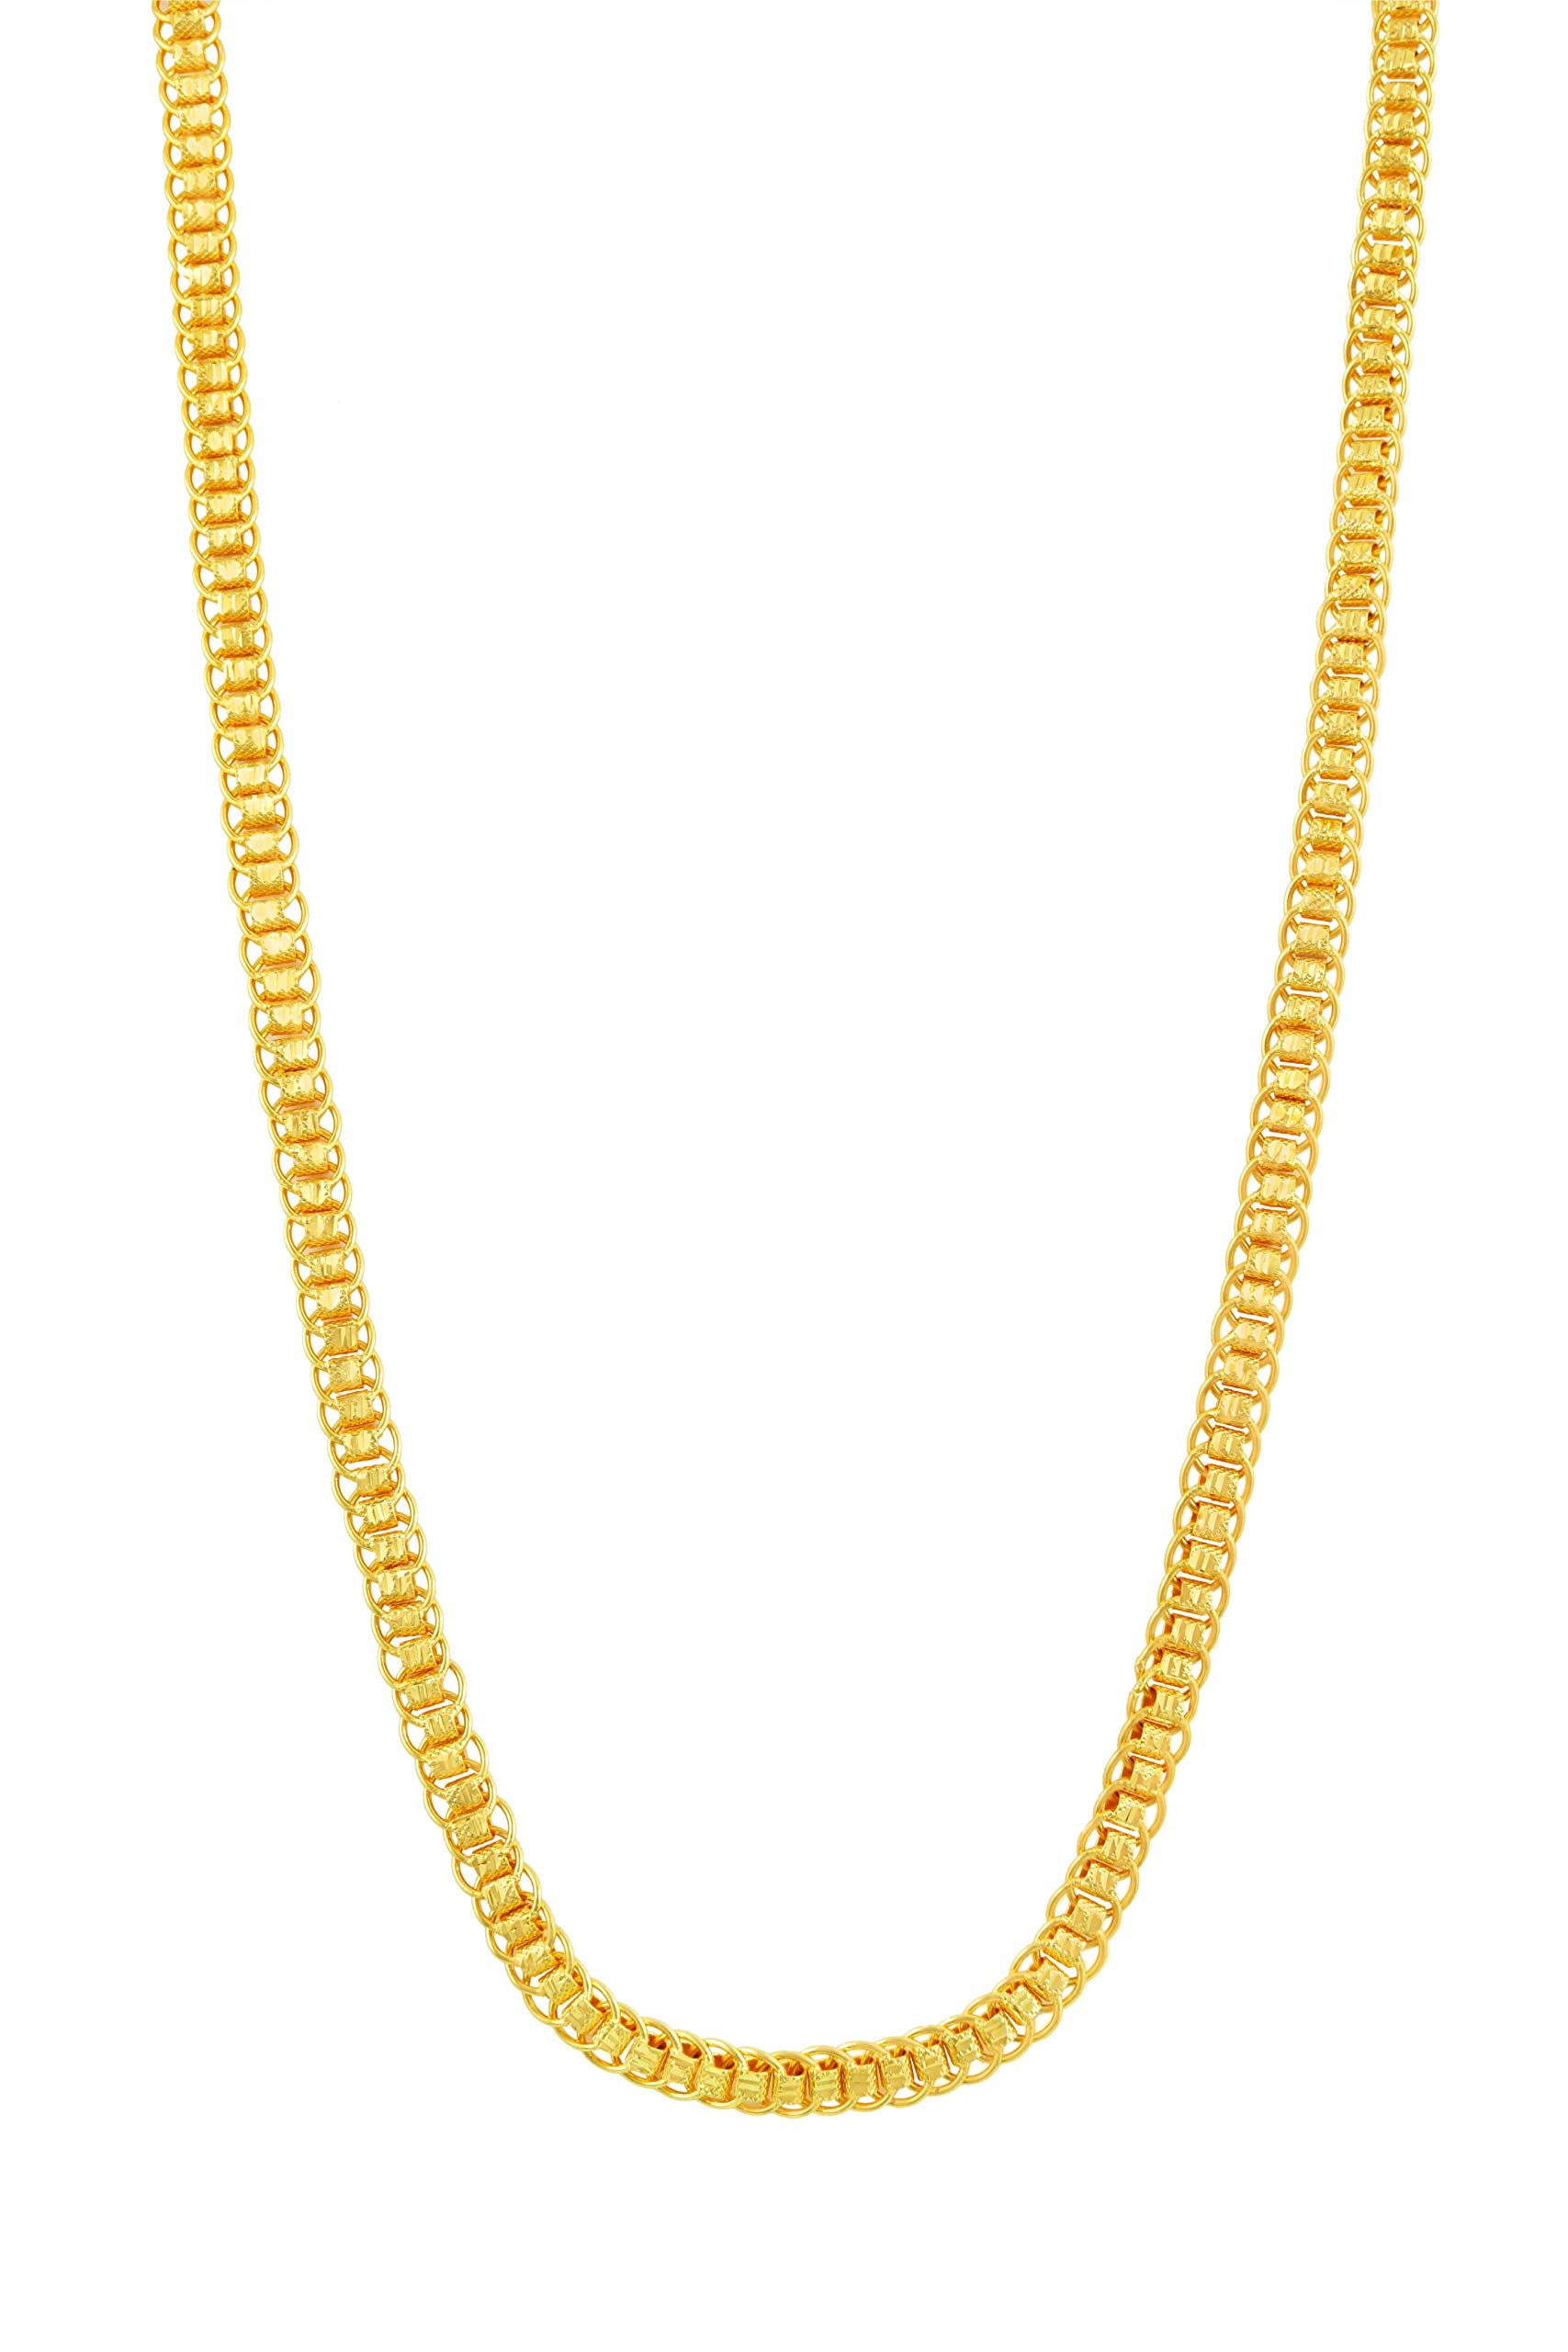 Yellow Chimes Chain for Men Golden Chain 21 Inch Gold-Plated Interlink Neck Chains for Men and Boys.